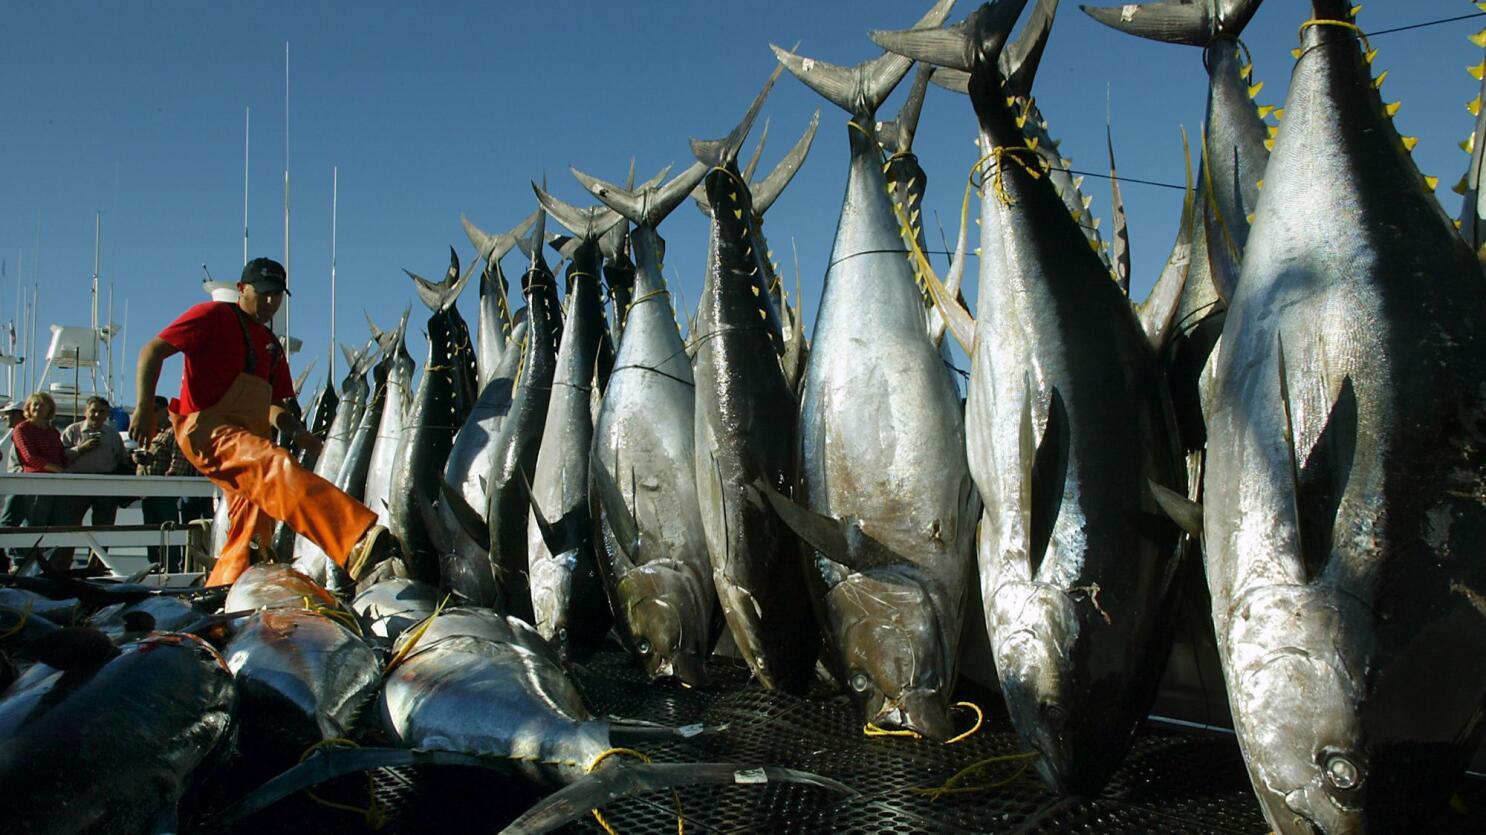 How safe is your tuna? It's important to know where it was caught